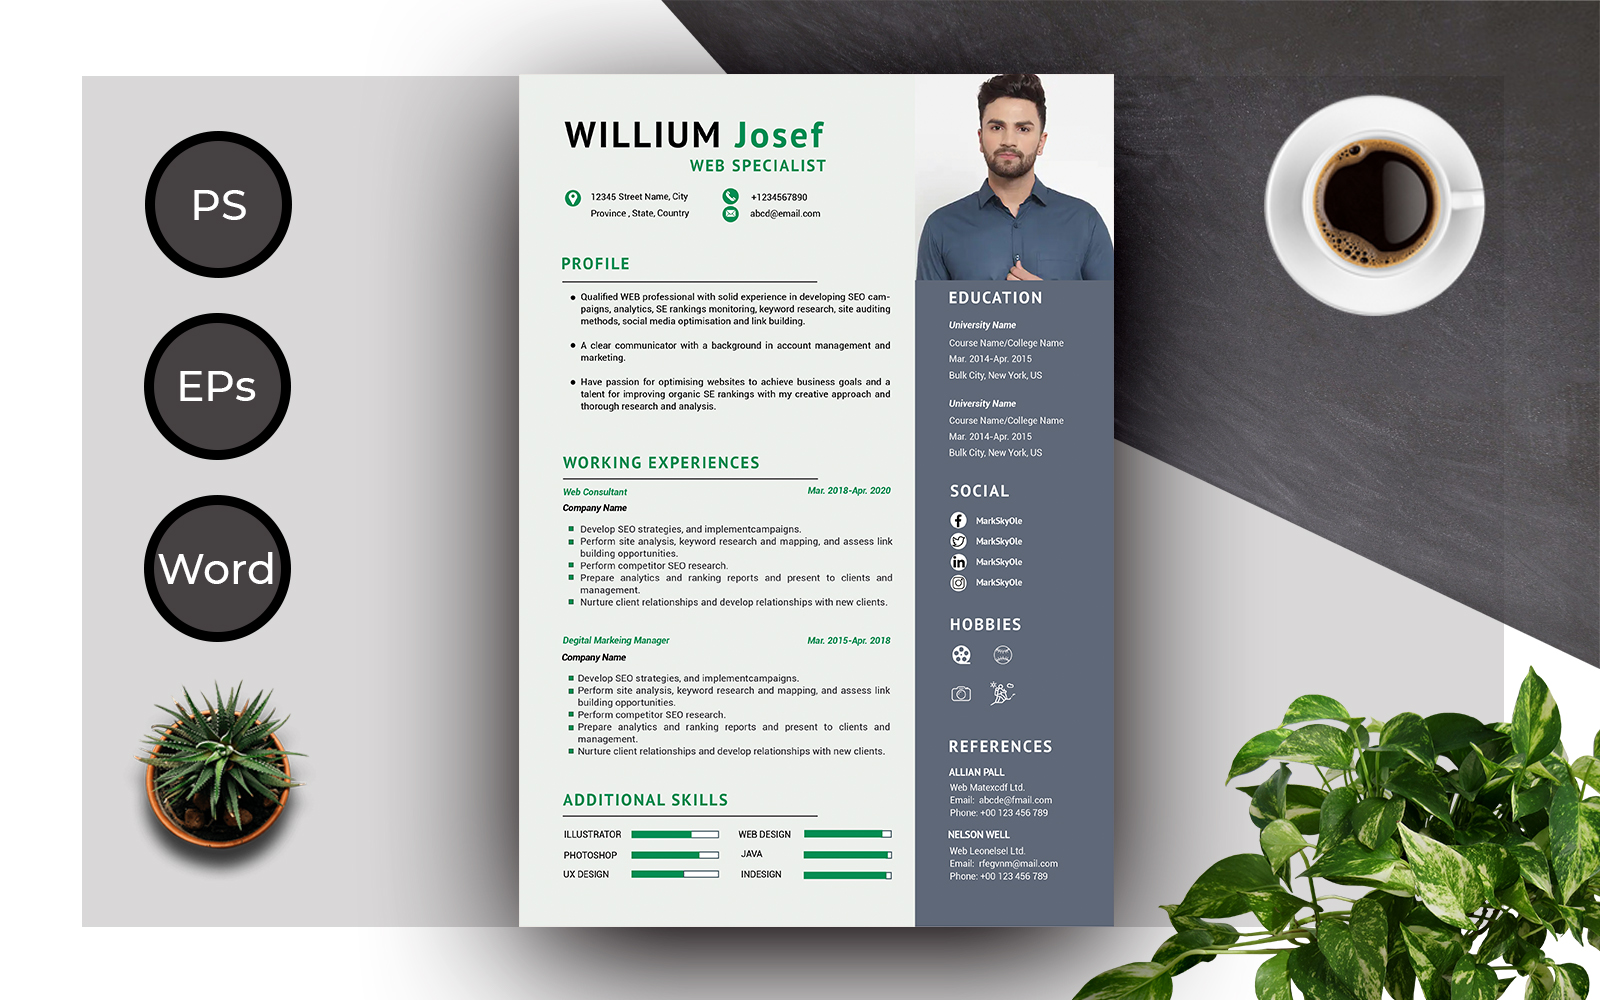 Resume Template of Willium Josef Complete And Professional CV Resume Template